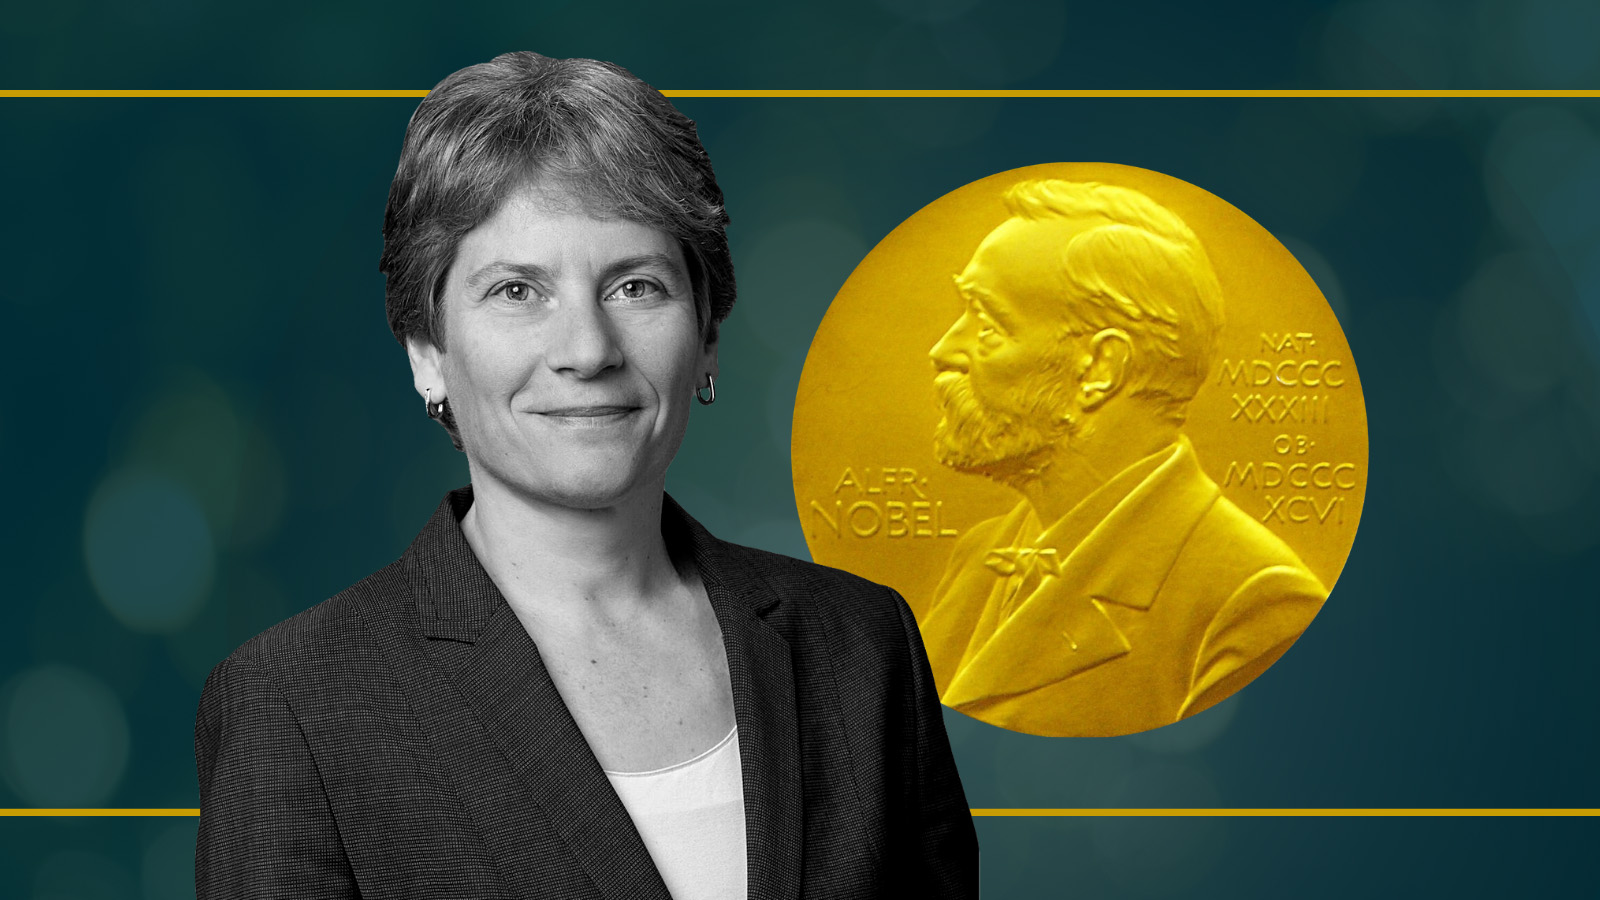 Three remarkable scientists with UC connections win Nobel Prizes